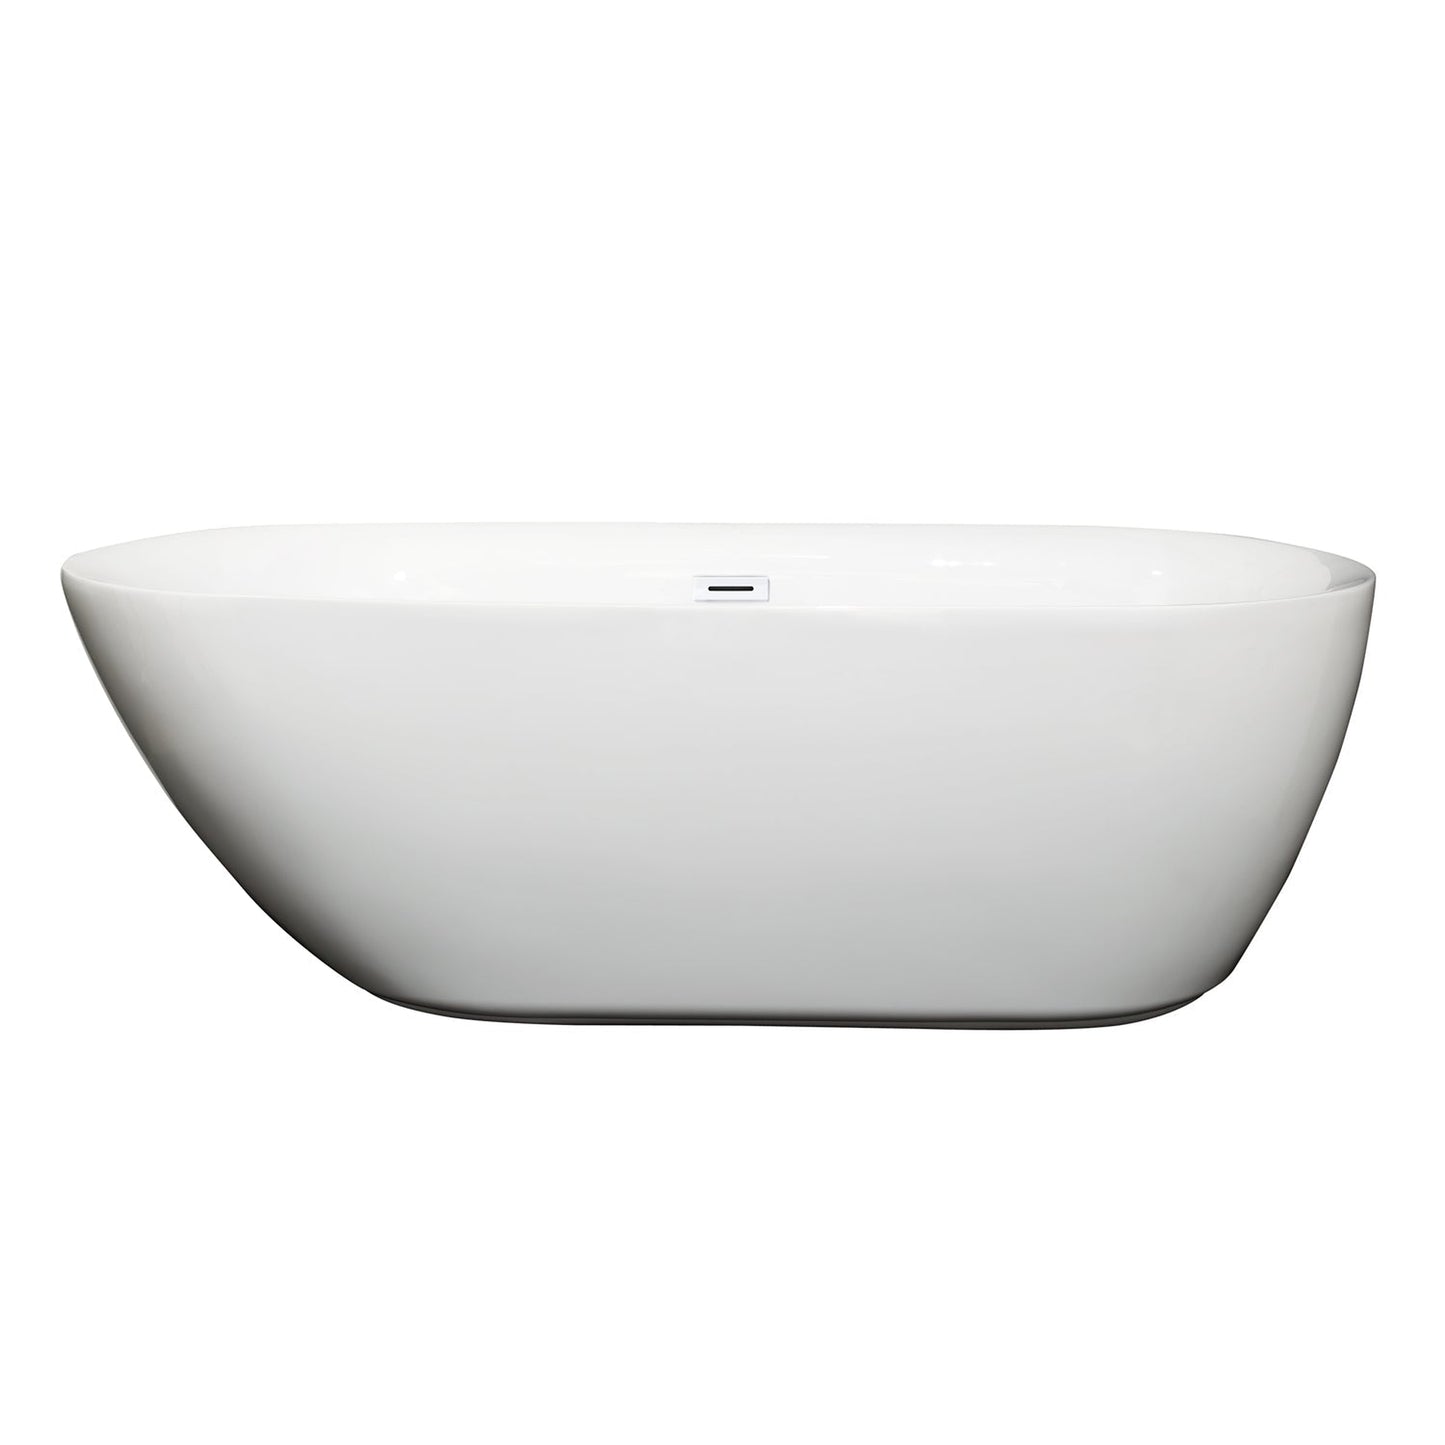 Wyndham Collection Melissa 65" Freestanding Bathtub in White With Shiny White Drain and Overflow Trim